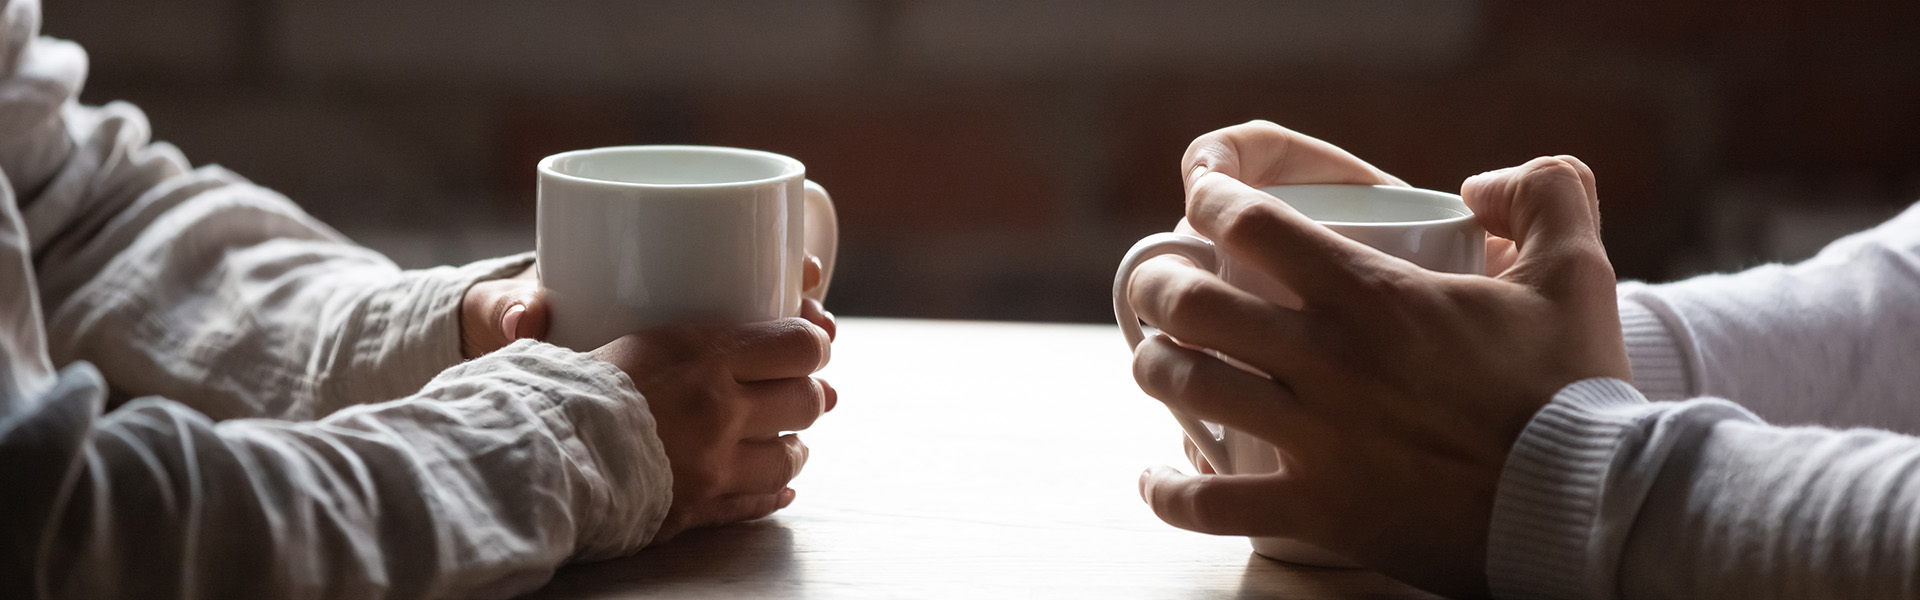 Close-up of couple holding cups of coffee on table